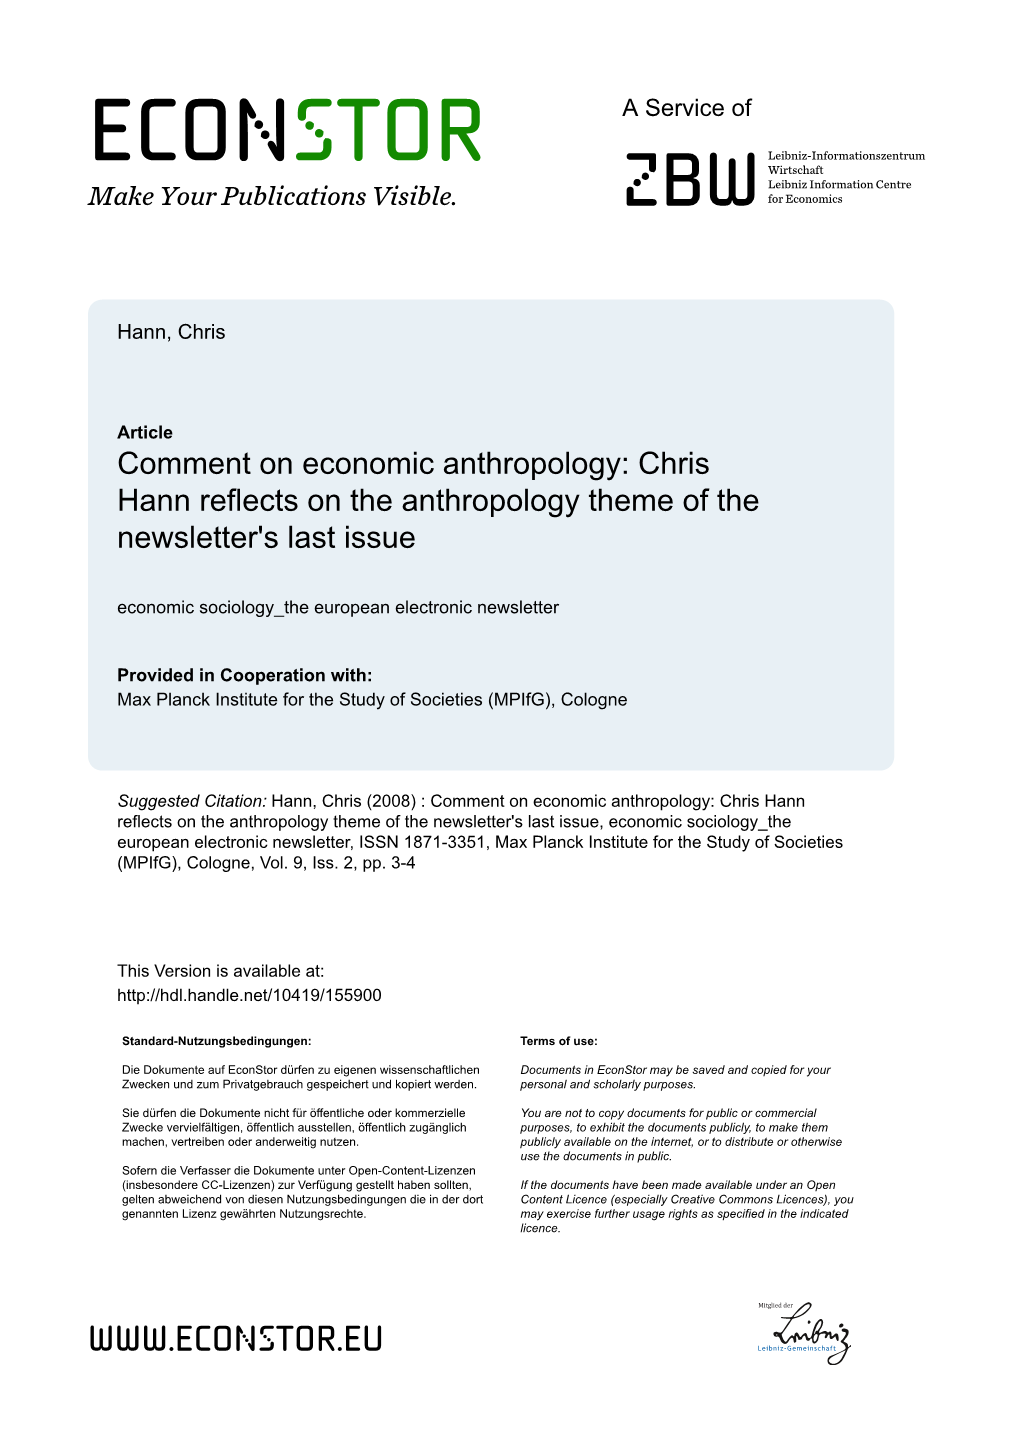 Chris Hann Reflects on the Anthropology Theme of the Newsletter's Last Issue